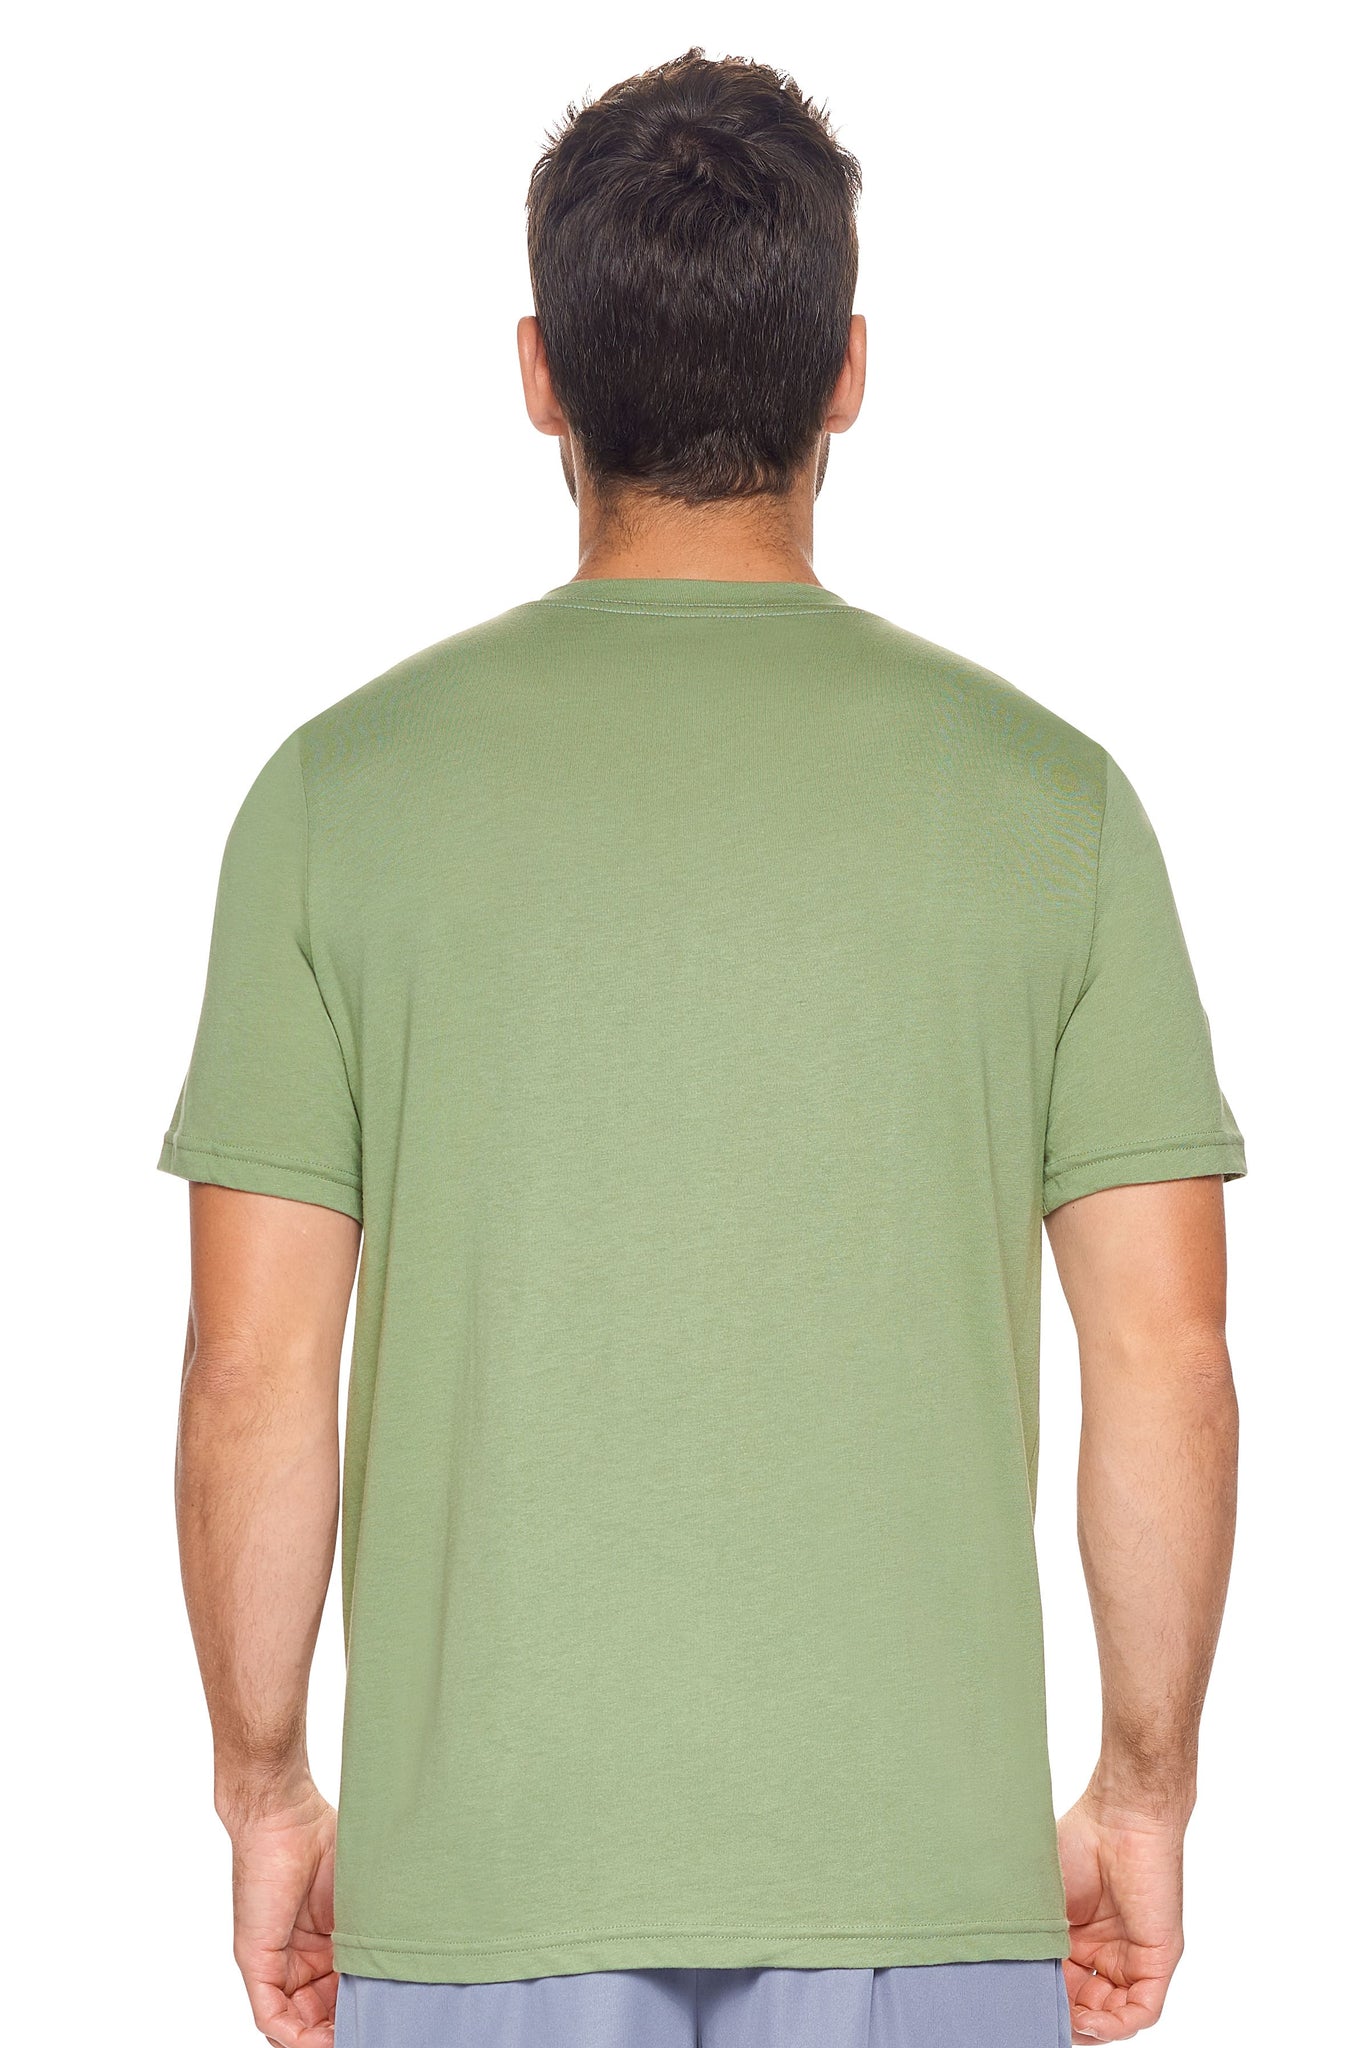 Expert Brand Wholesale Sustainable Eco-Friendly Apparel Micromodal Cotton Men's V-neck T-Shirt Made in USA meadow green 3#meadow